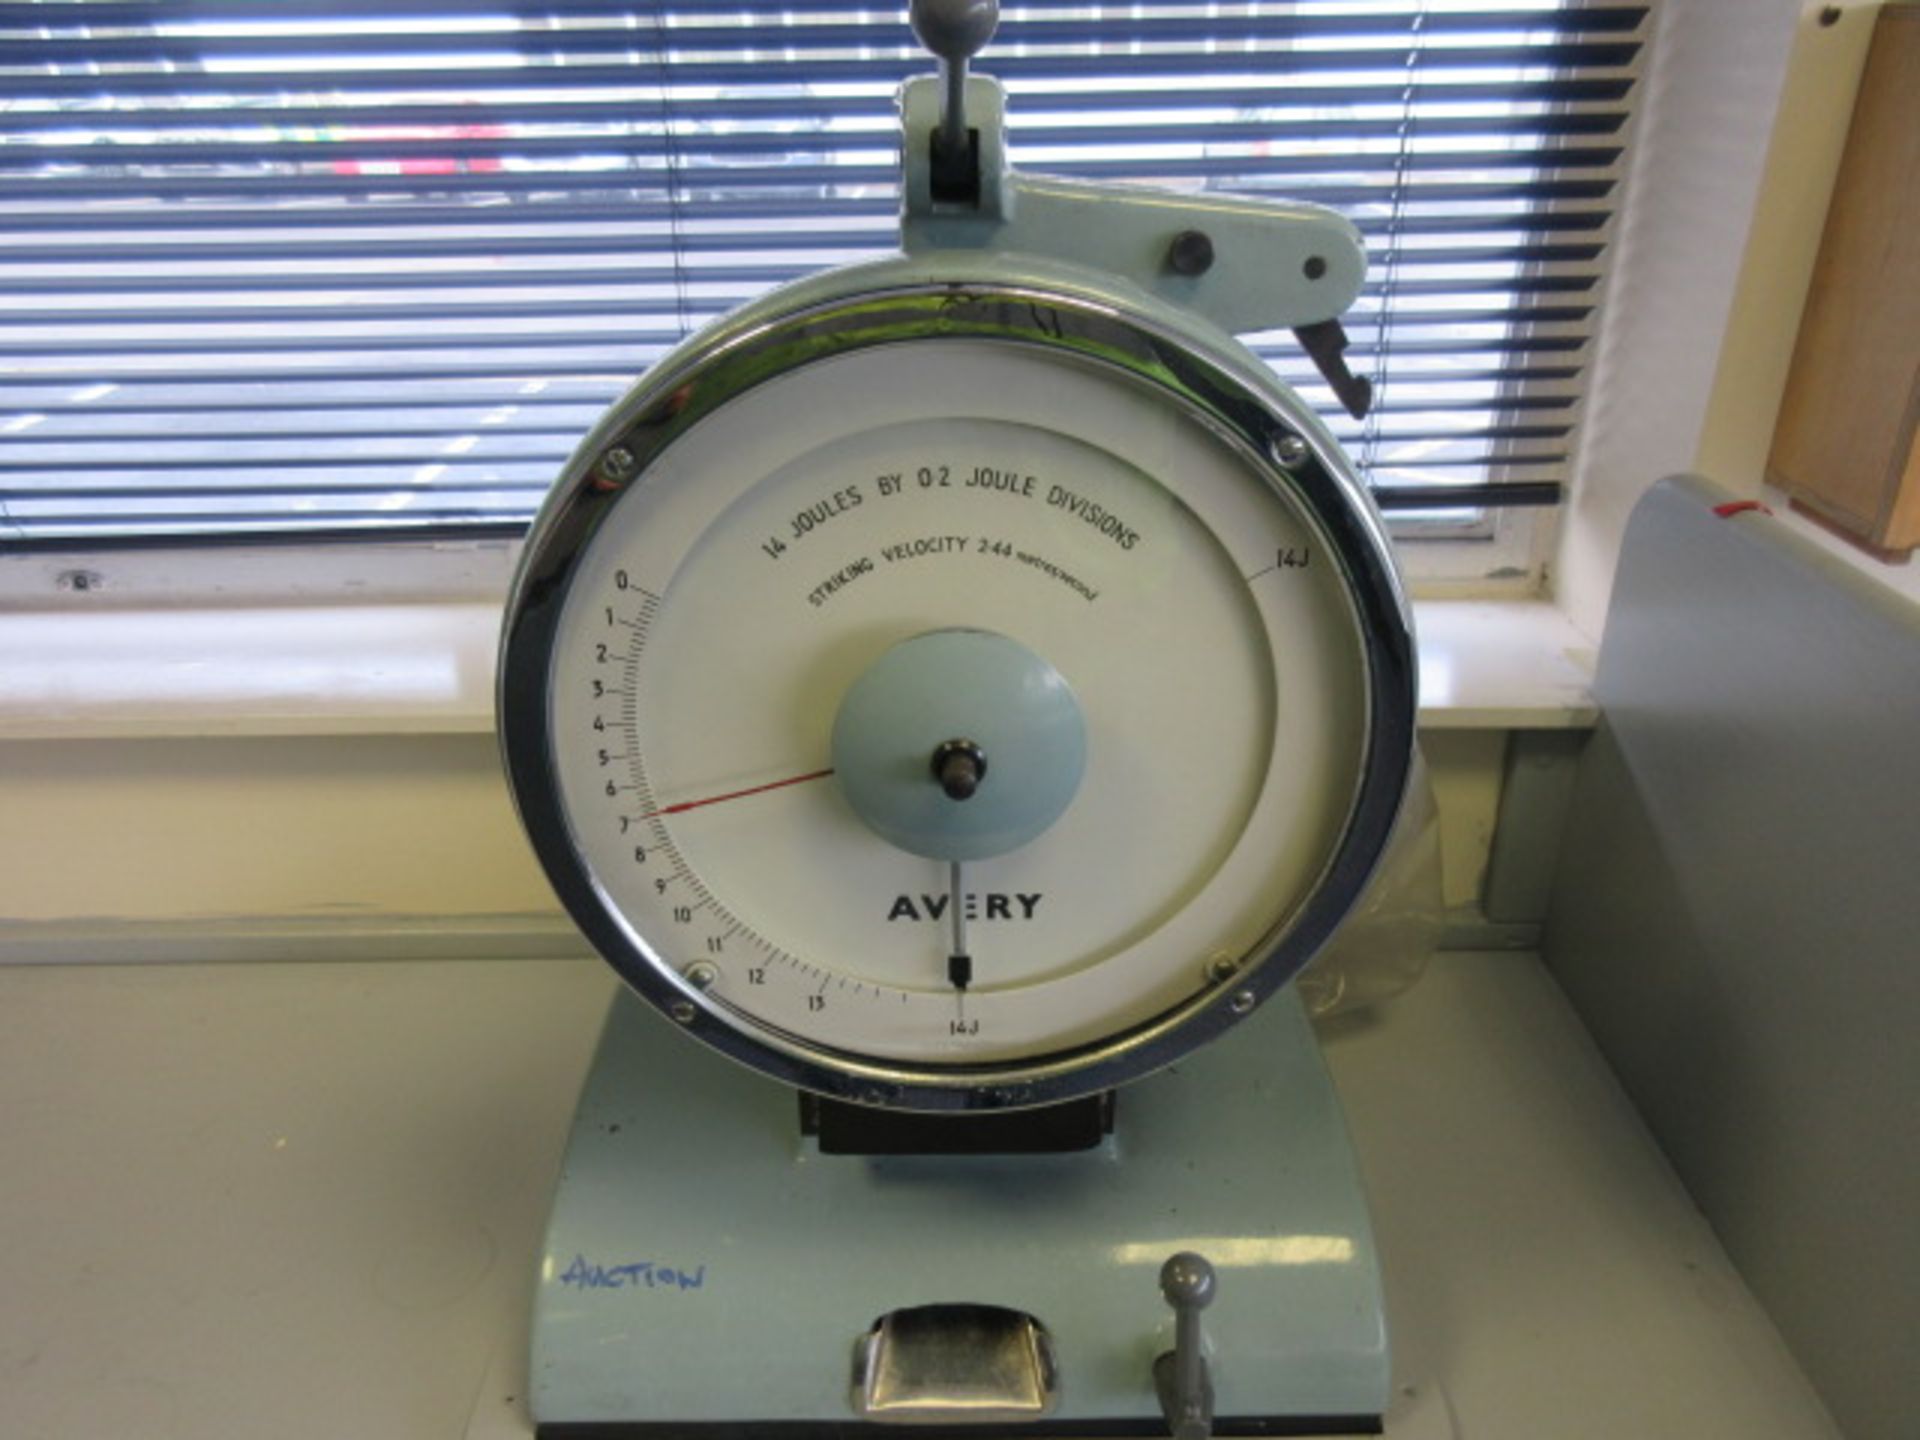 AVERY 14 J BENCH TOP IMPACT TESTER